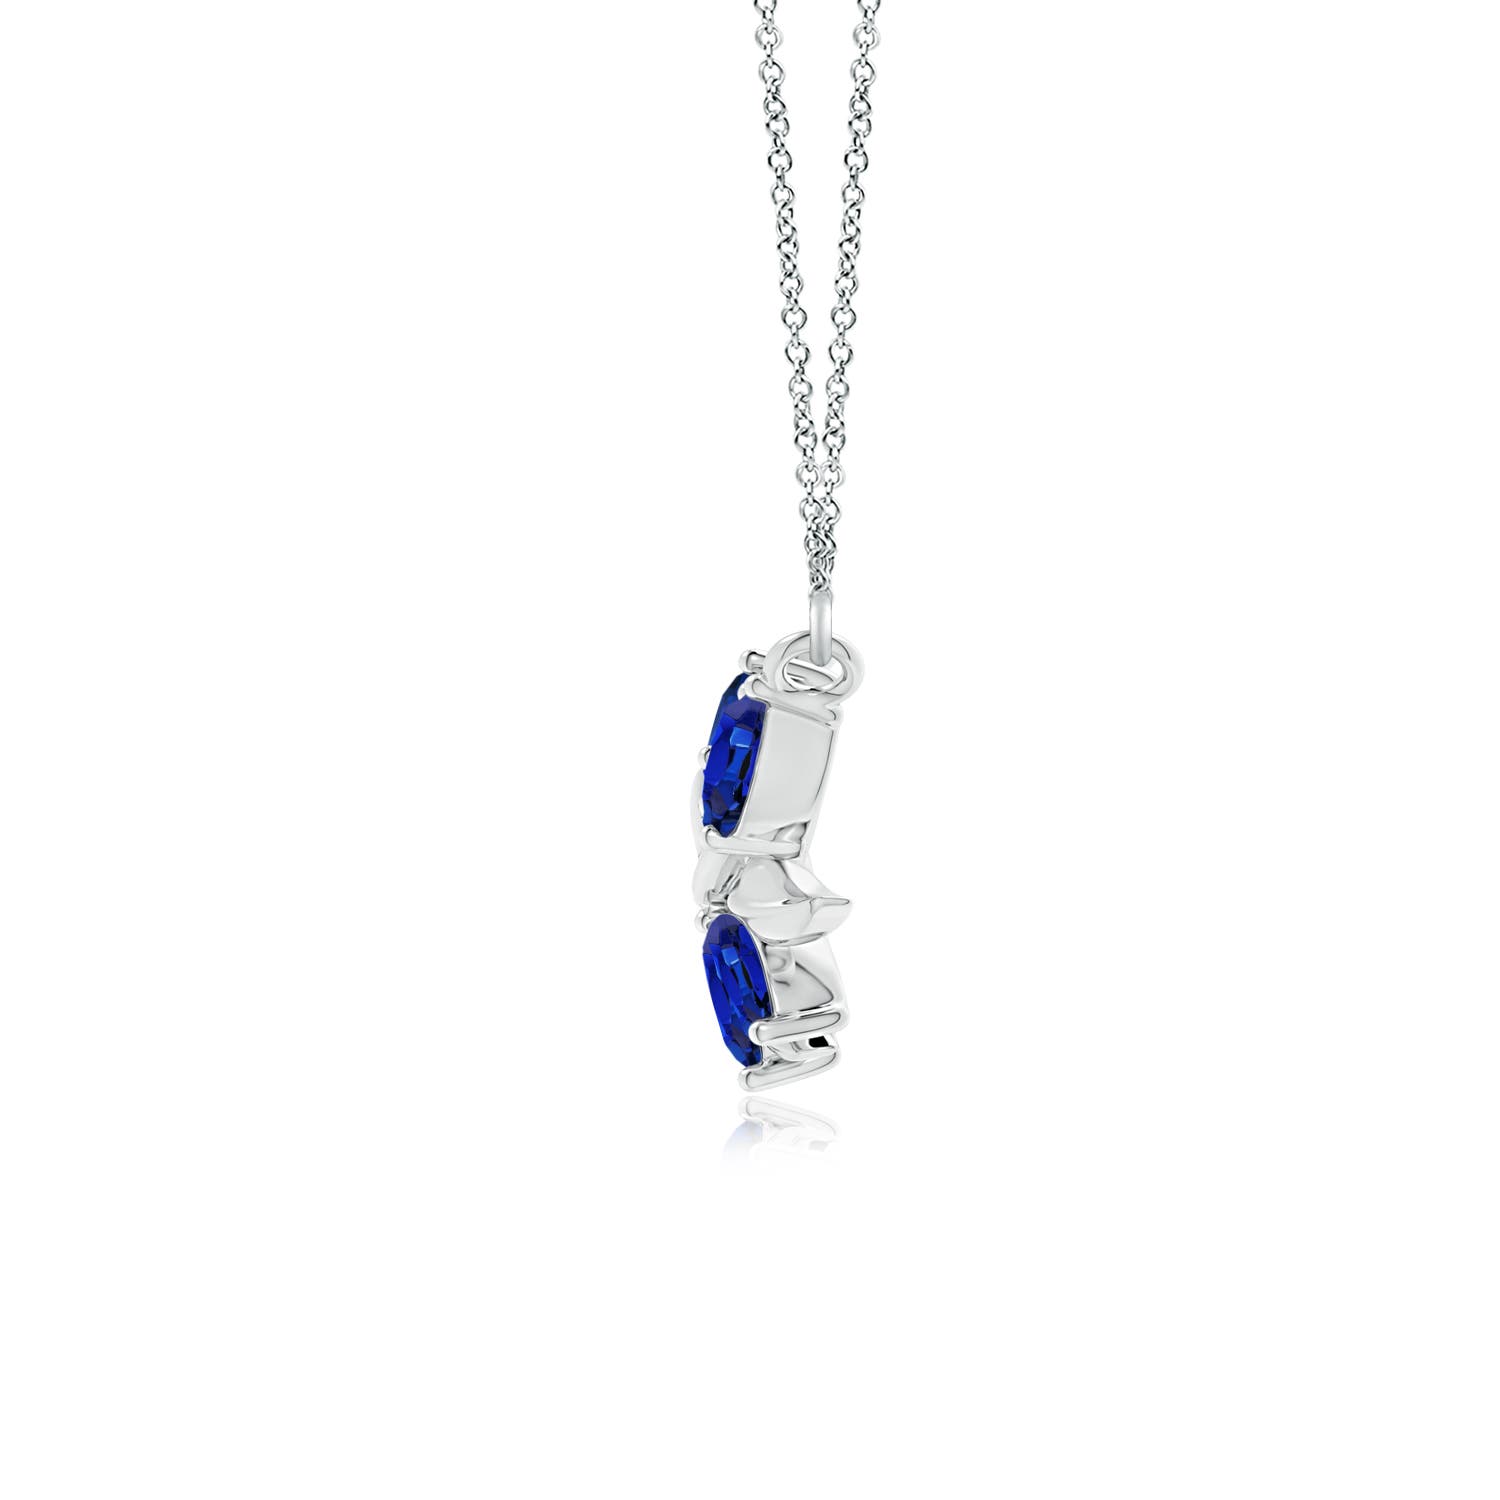 AAA - Blue Sapphire / 1.25 CT / 14 KT White Gold